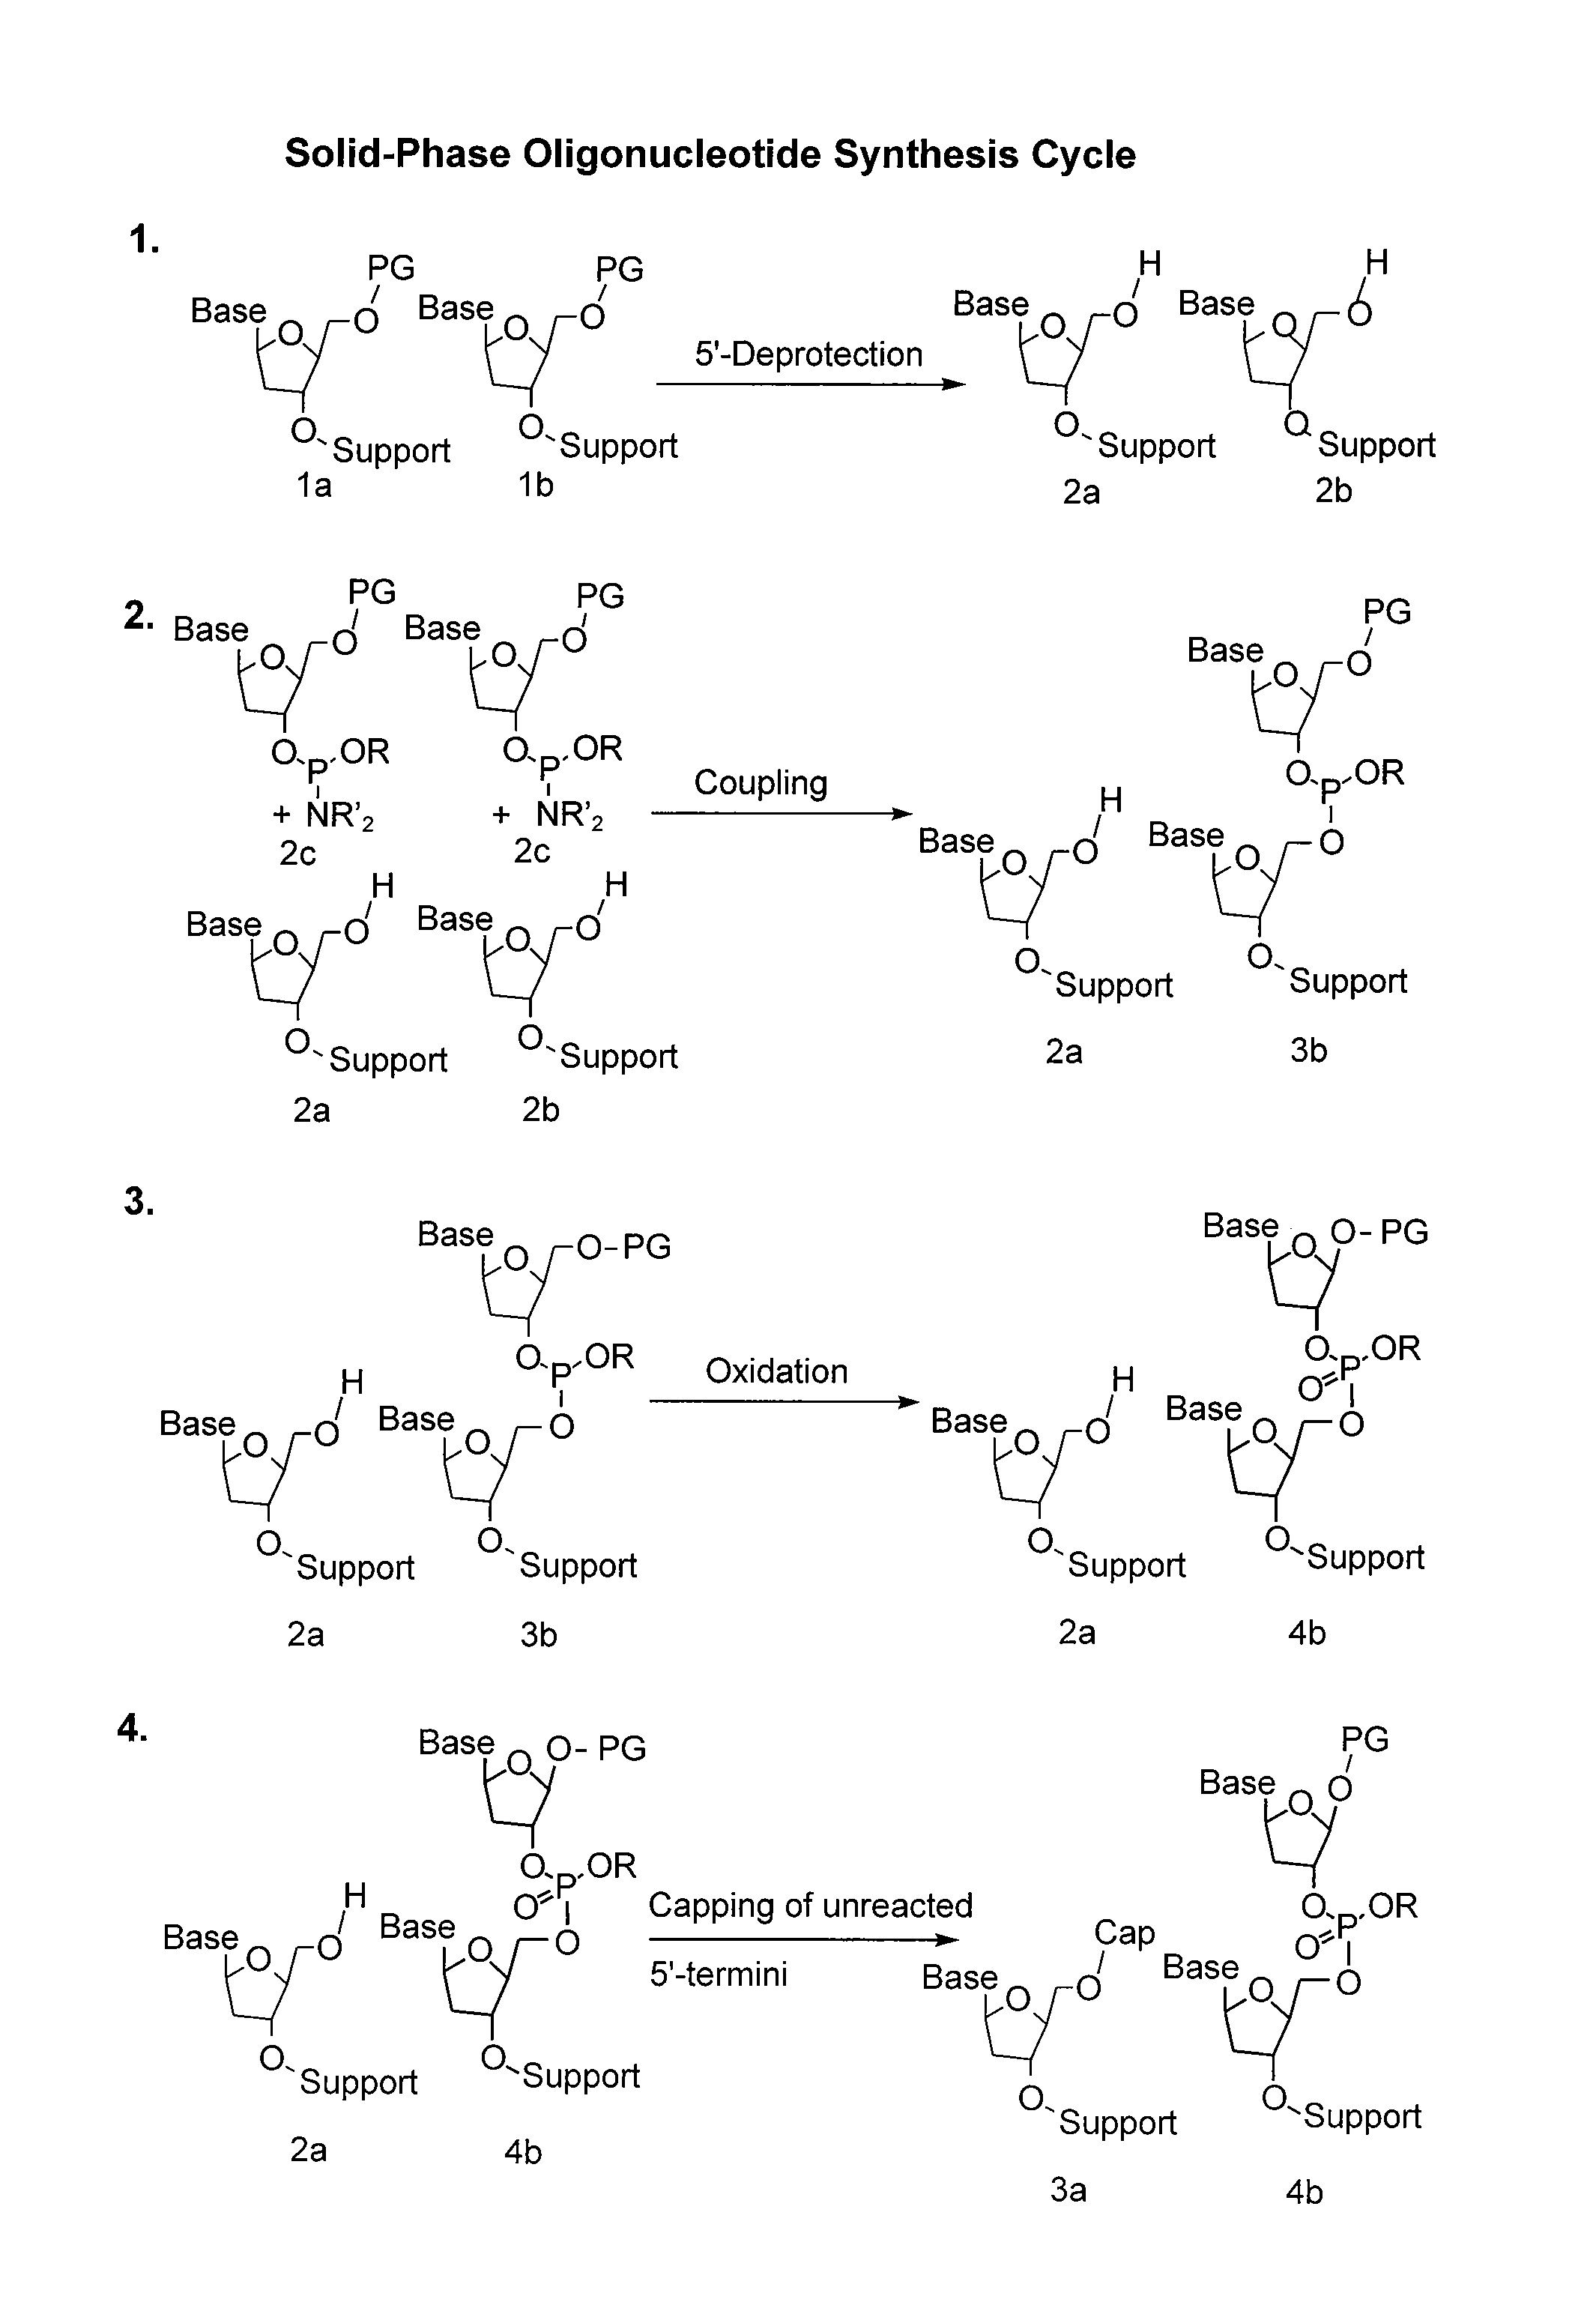 Compounds and methods for synthesis and purification of oligonucleotides